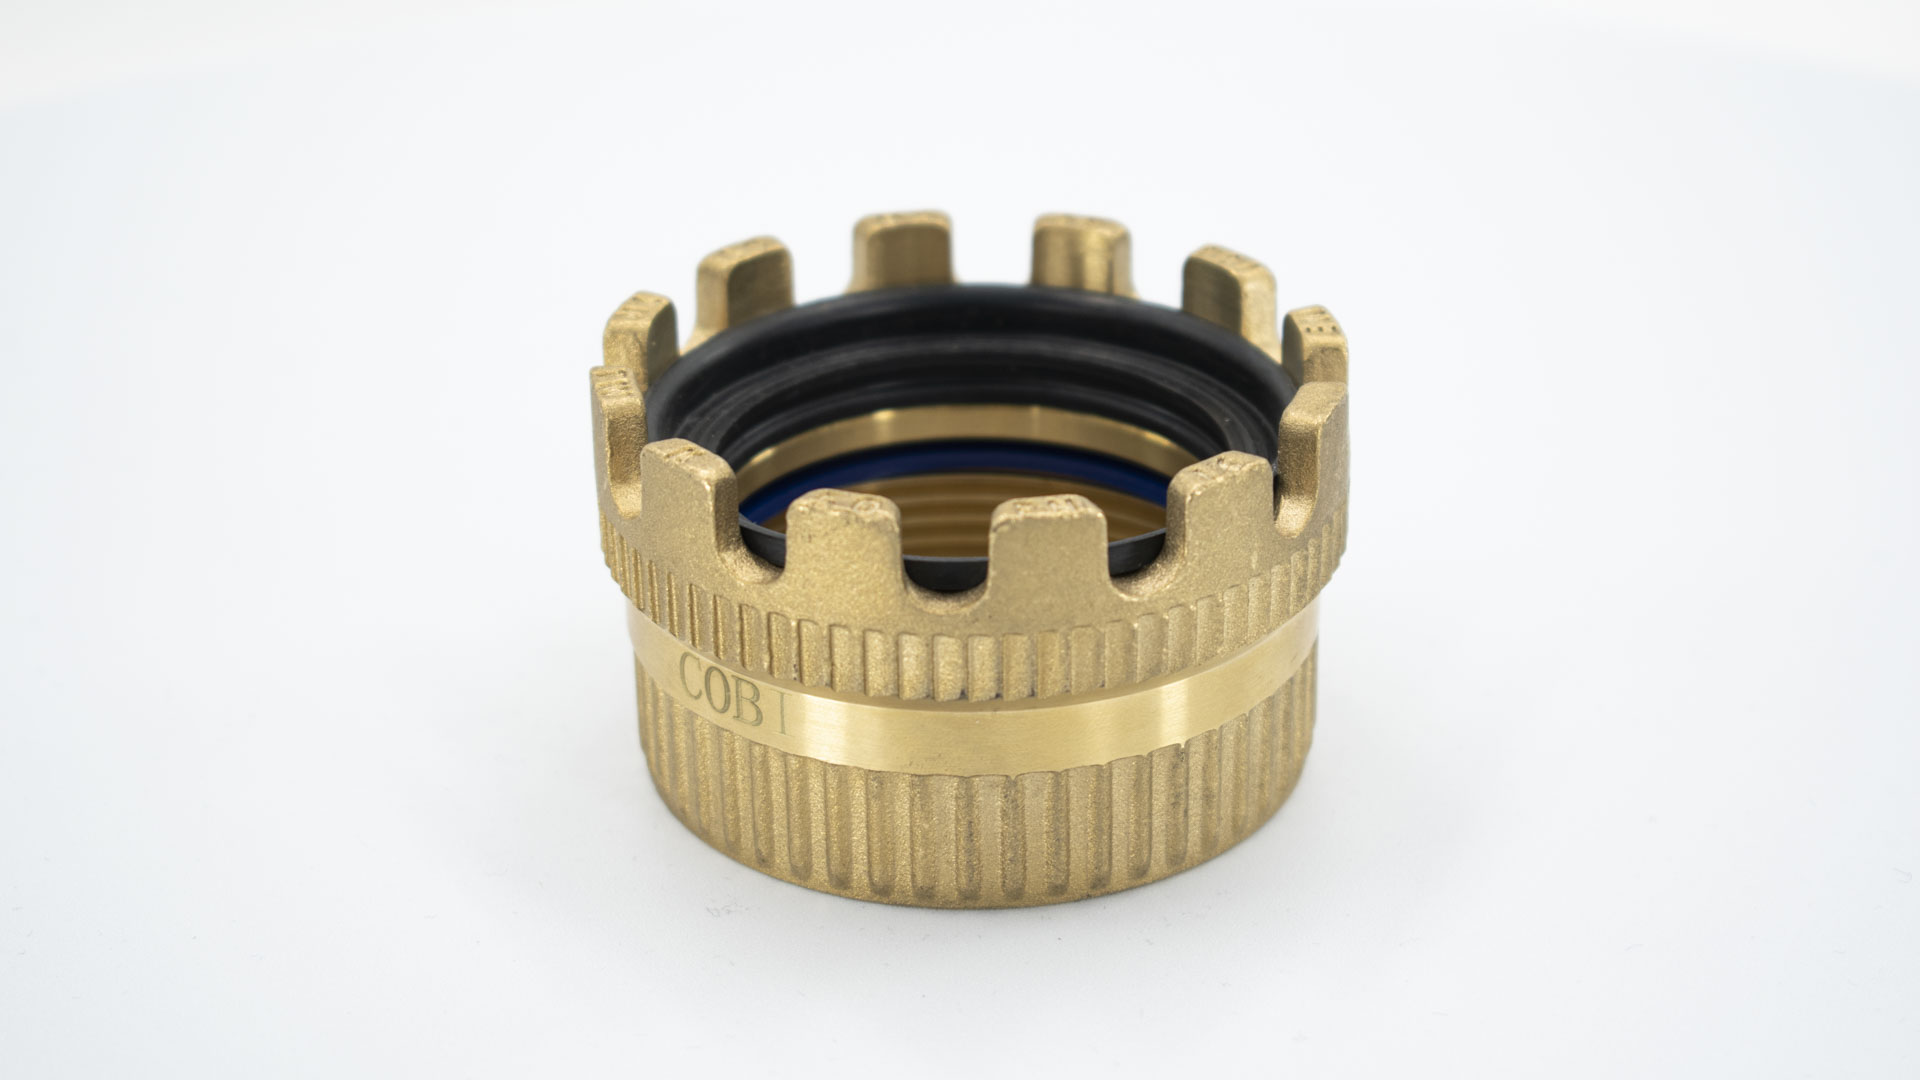 TW sealing ring piece made of brass according to DIN EN 14420-6 (DIN 28450)